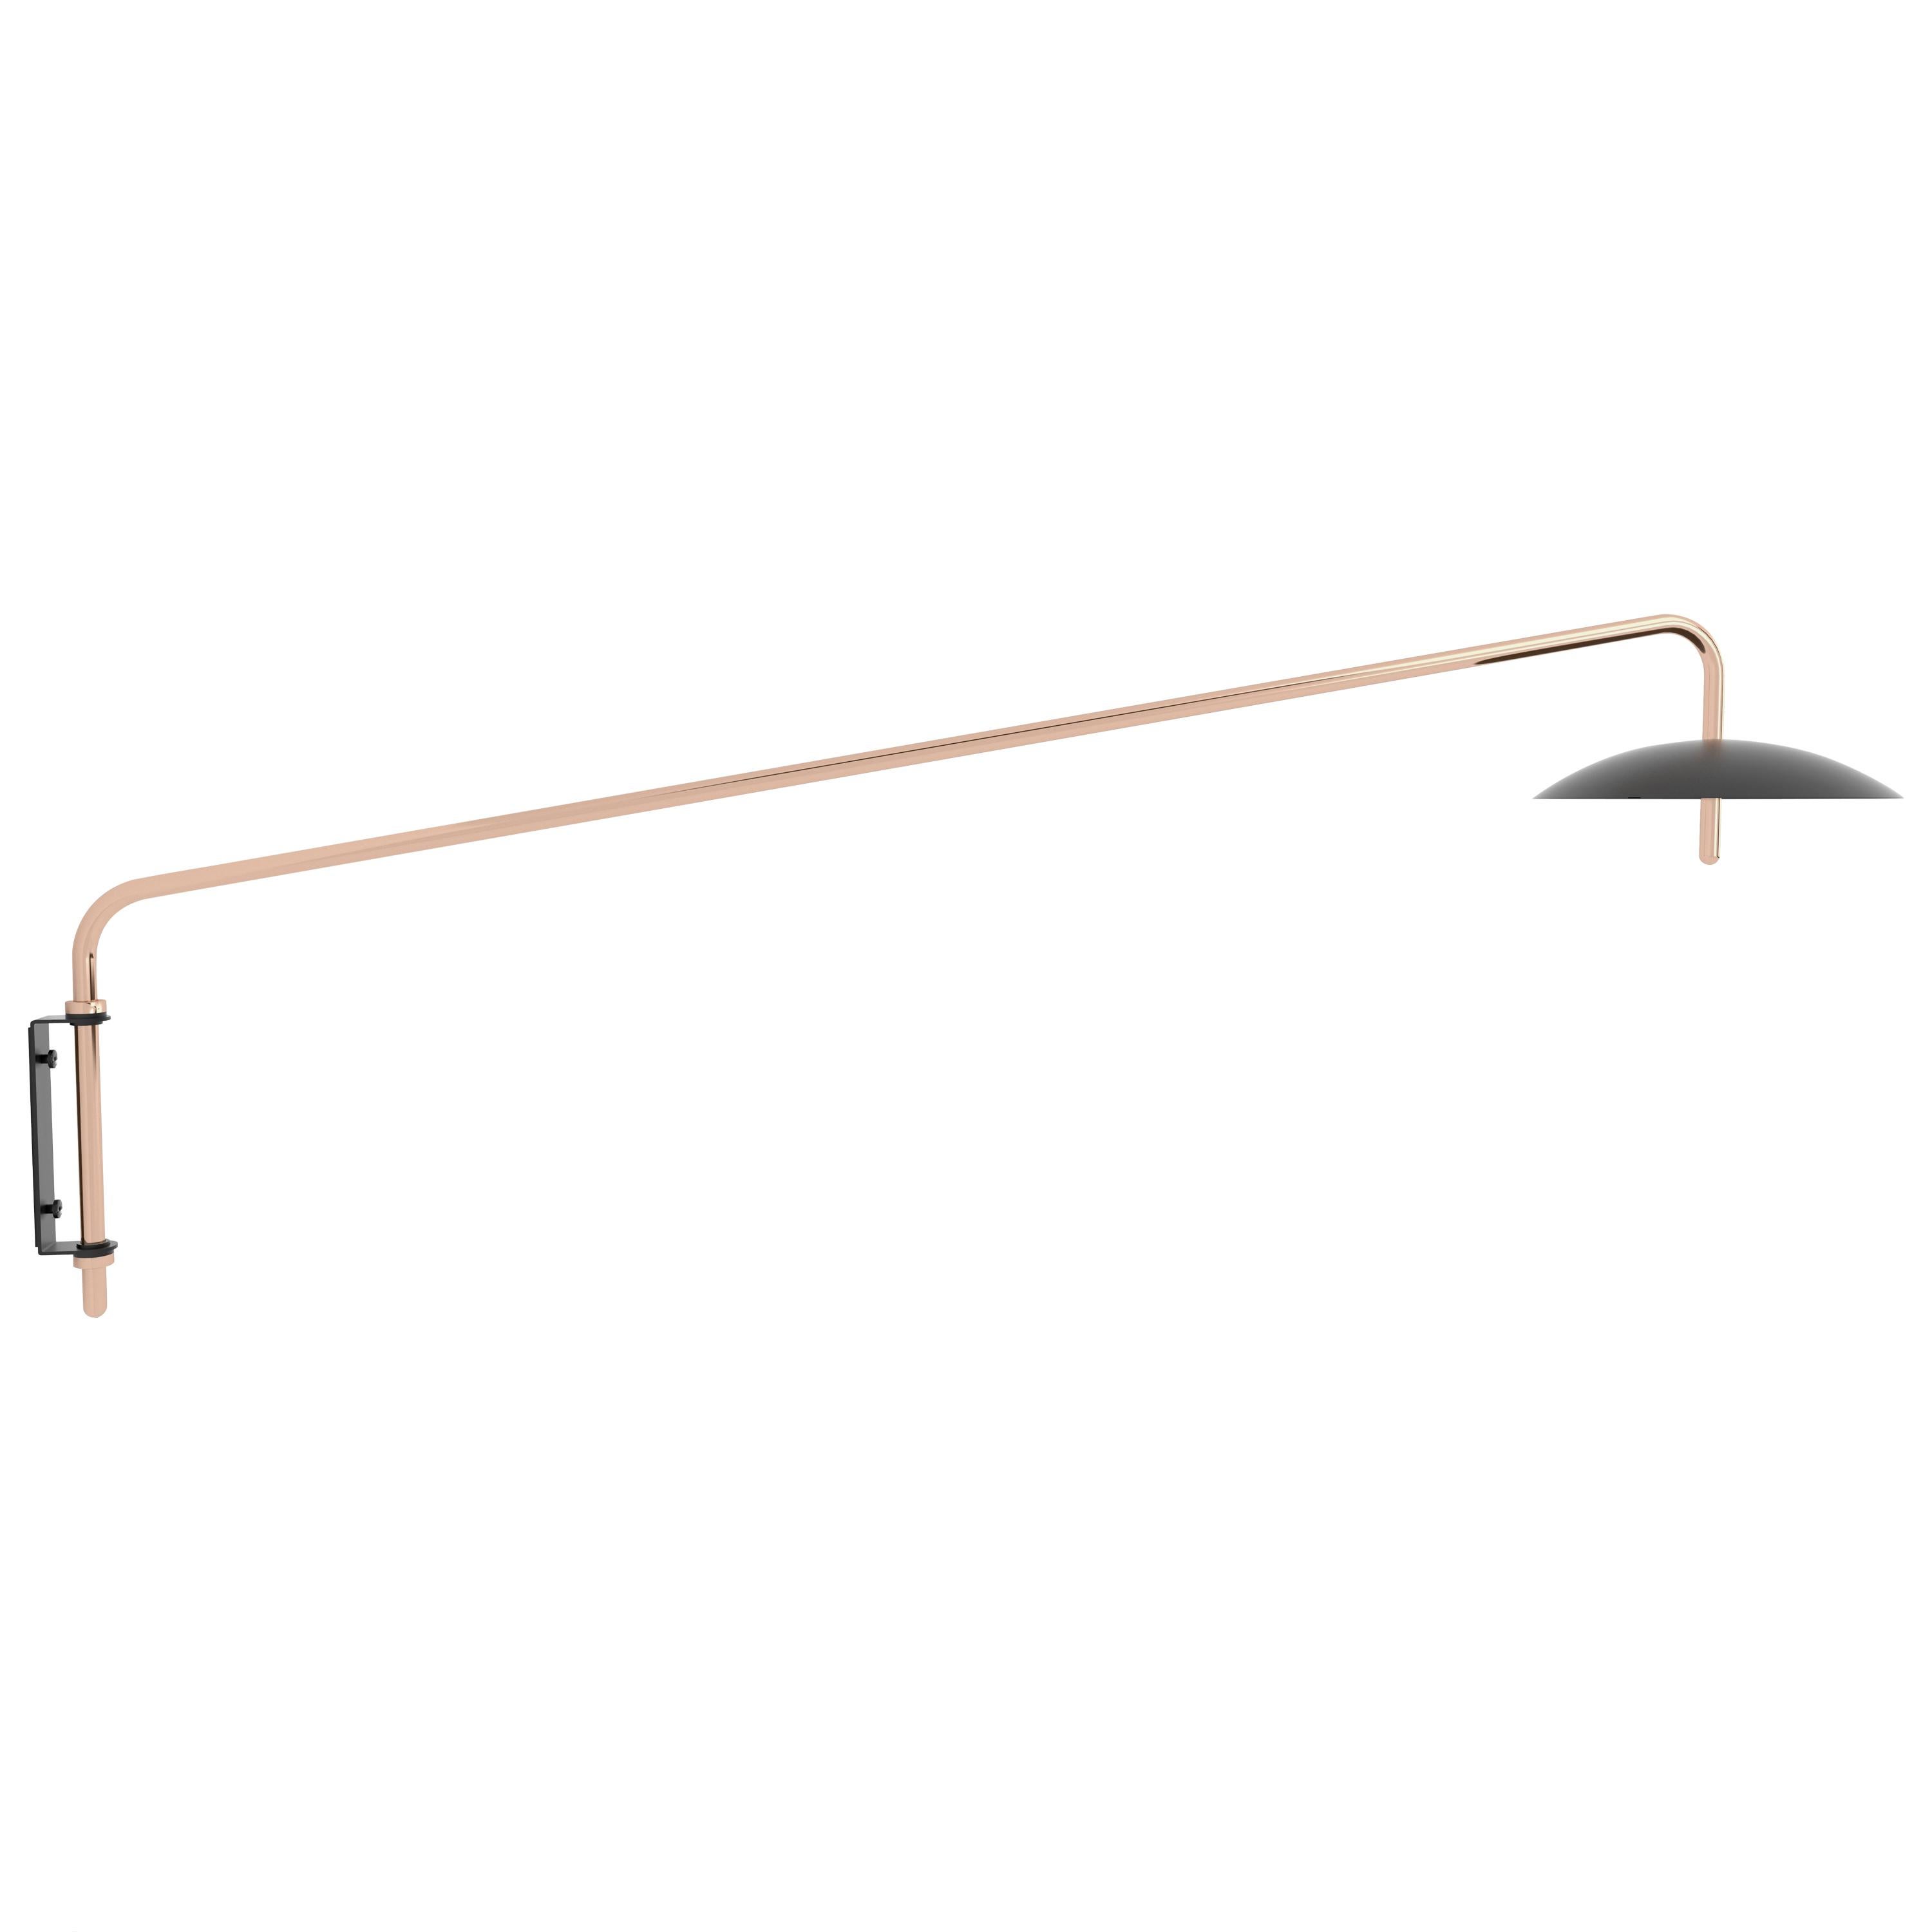 The signal arm sconce is a rotatable sconce that seamlessly blend the Mid-Century Modern aesthetic with that of science fiction. A bent aluminum tube cantilevers from a wall-mounted bracket to allow the spun shade to hover above any interior. Clean,